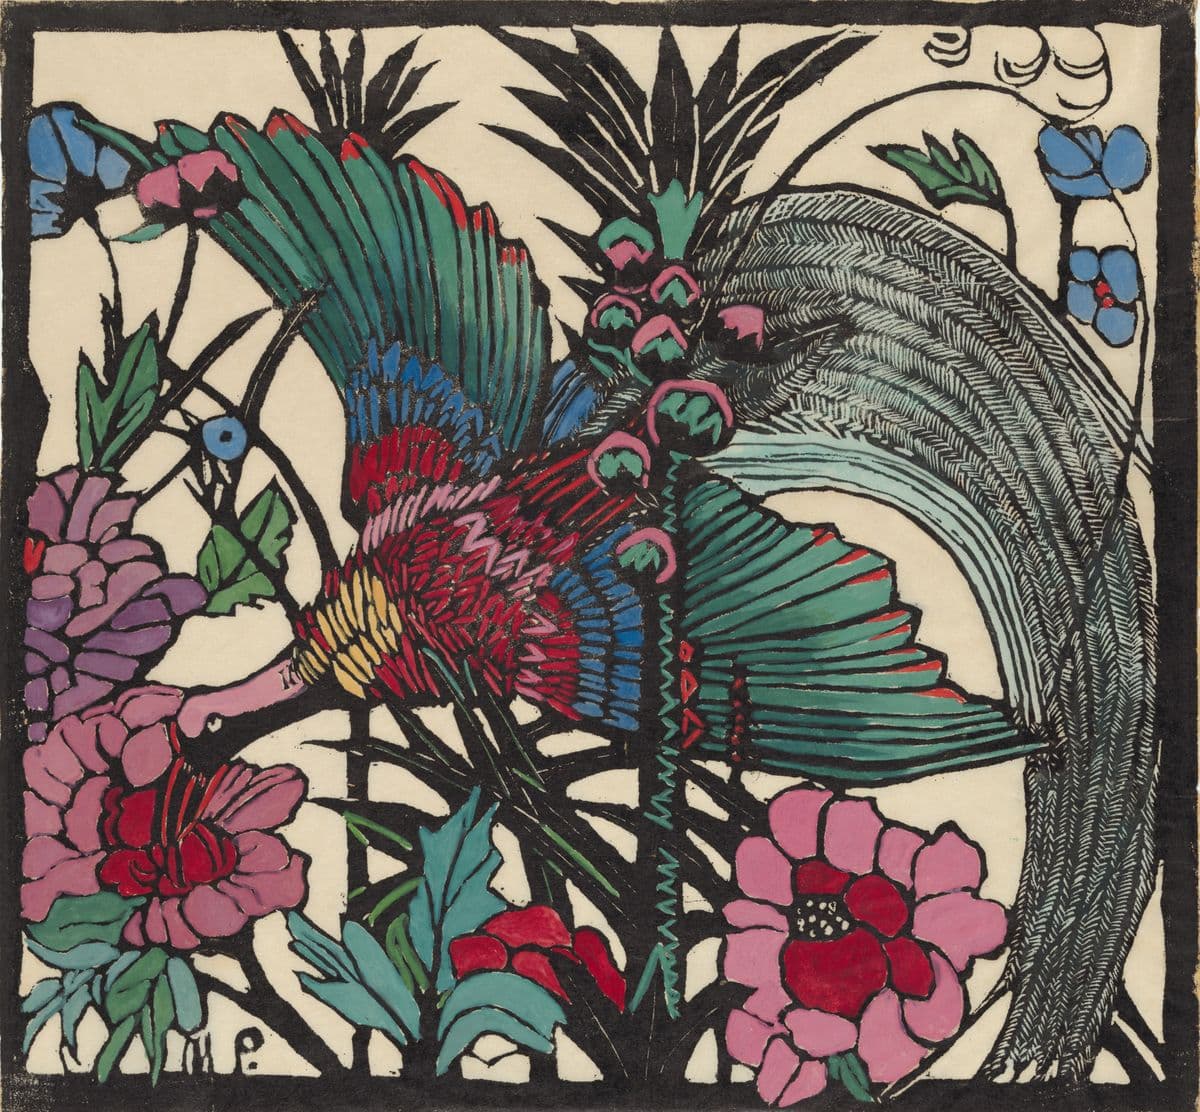 Multicoloured print of a large Bird soaring through a series of flowers